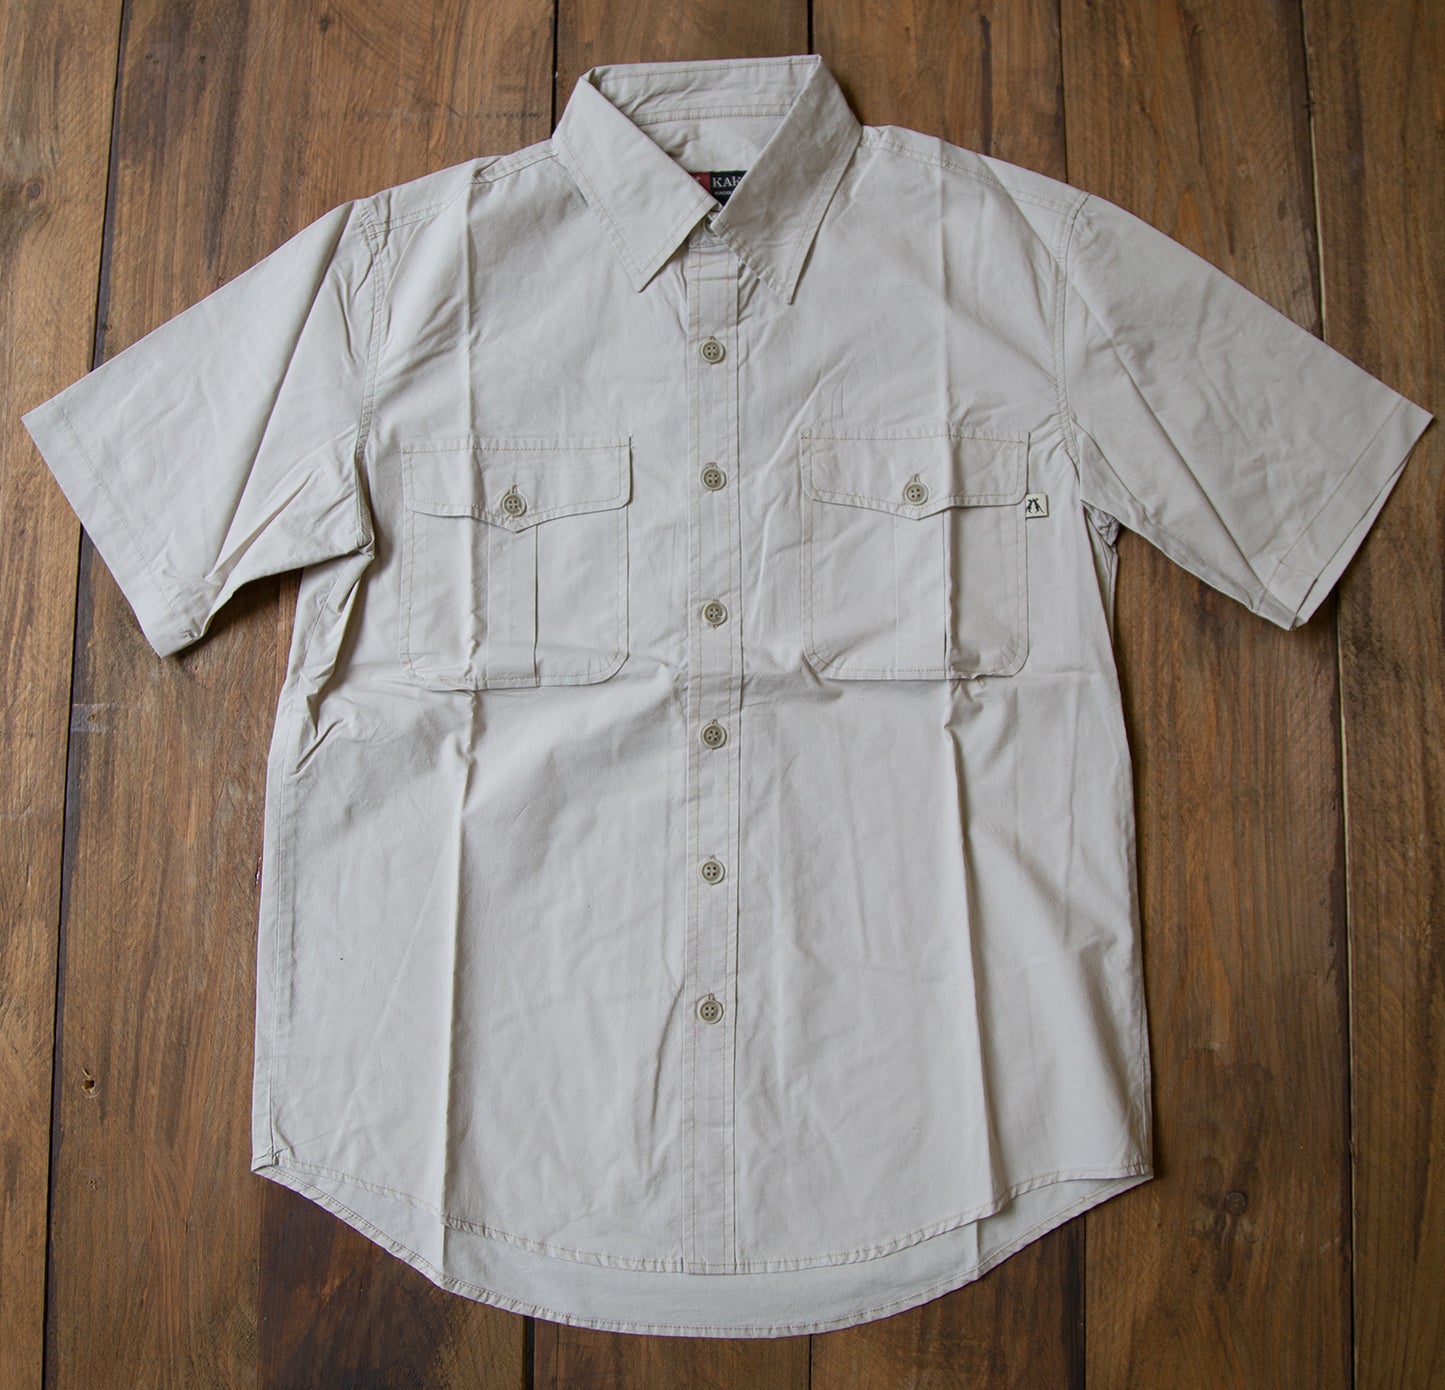 Short arm outdoor | Leisure time shirt made of cotton in beige | Single piece in s